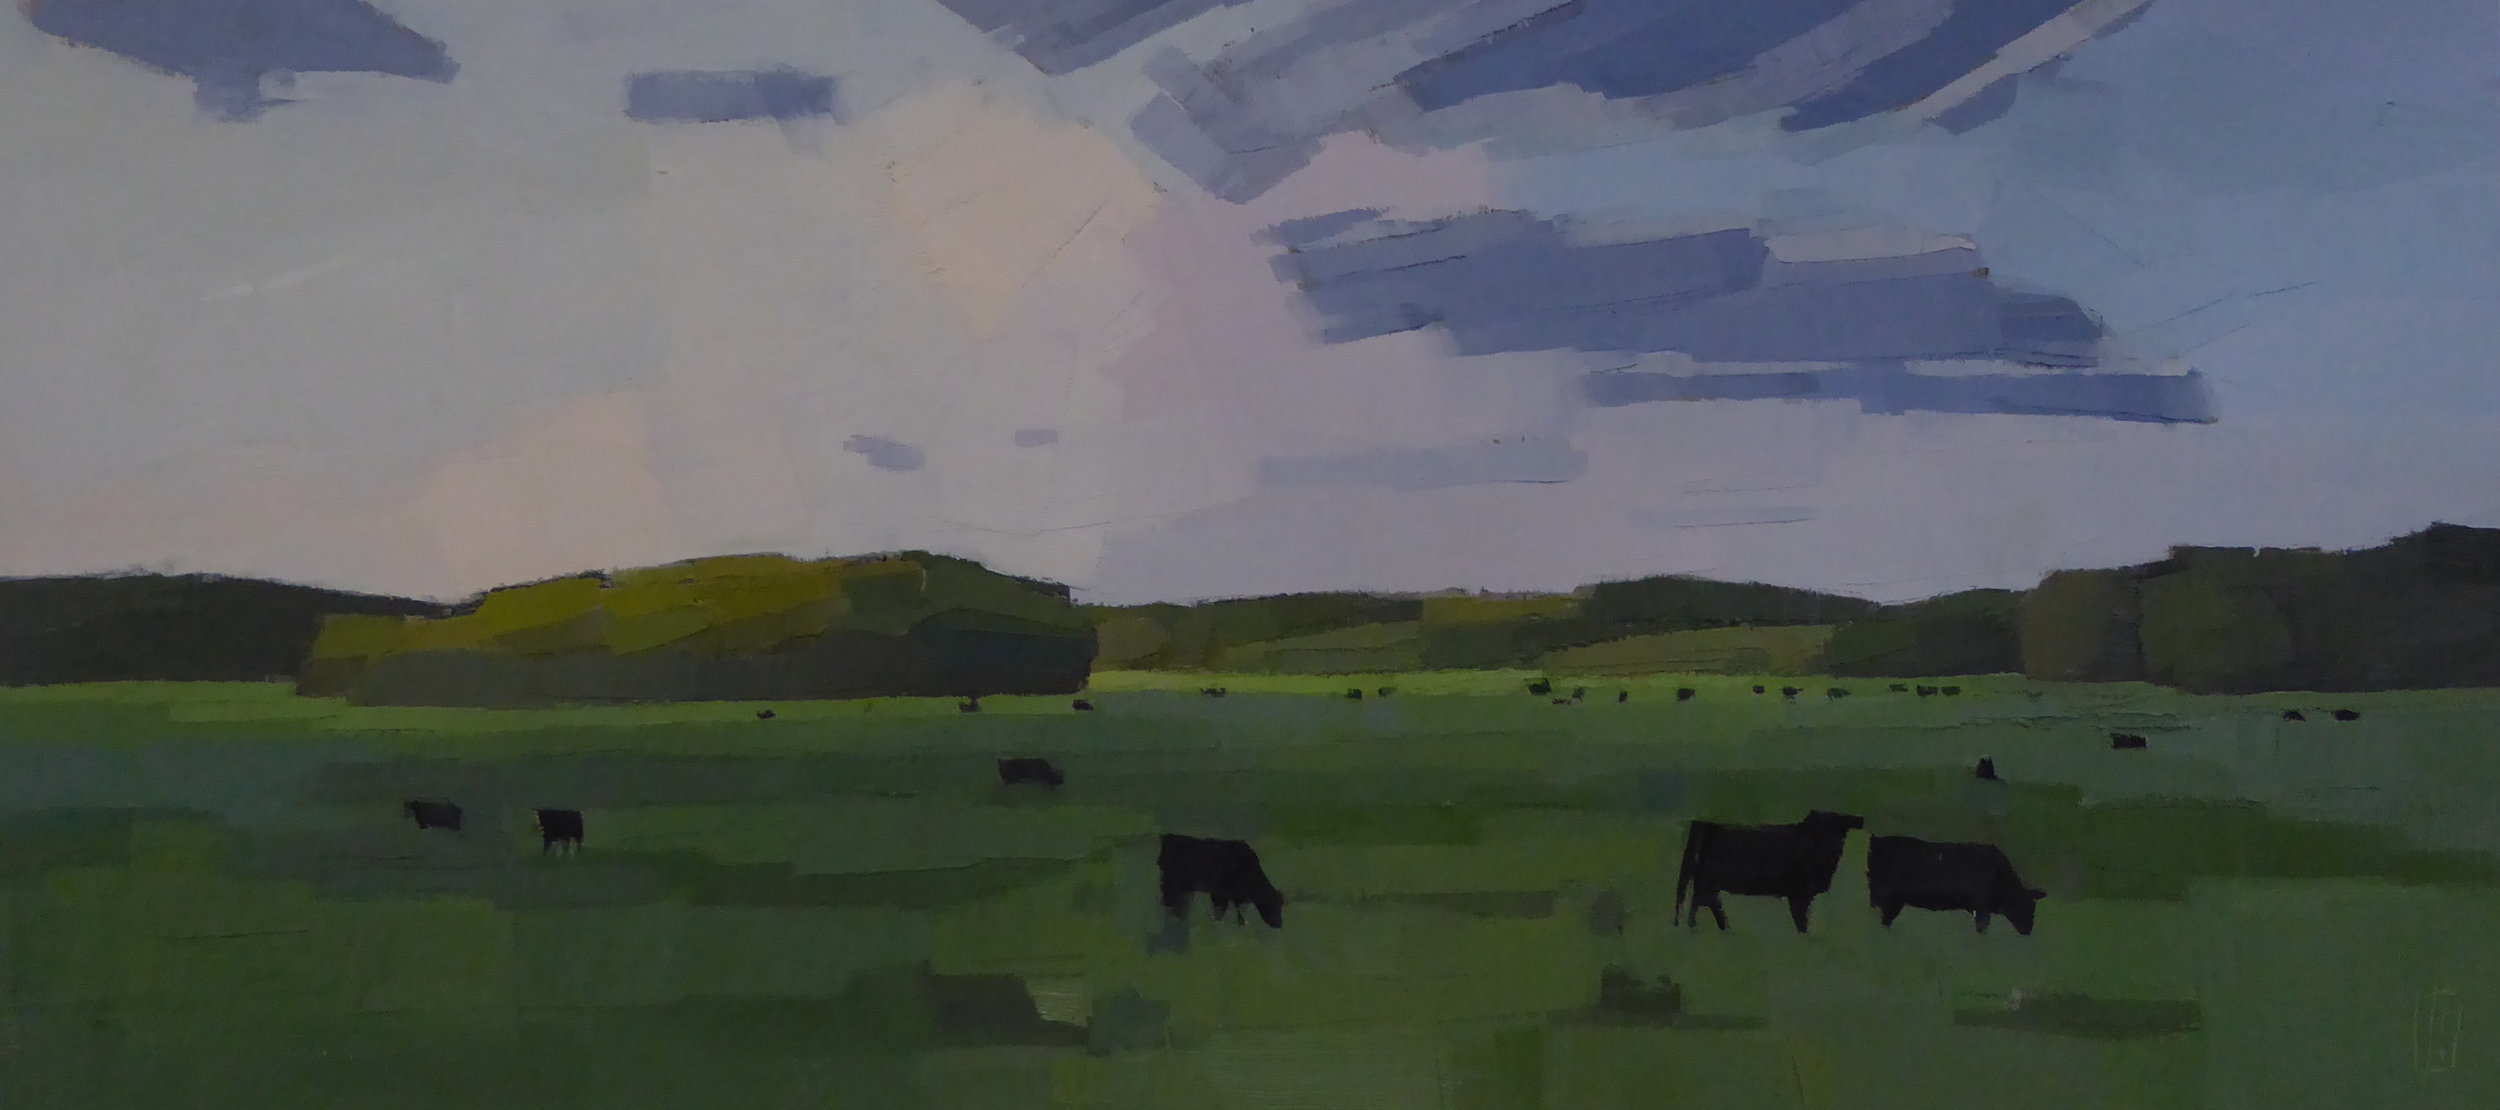  Black Cows, Green Field 10 x 22  Collection the Artist 